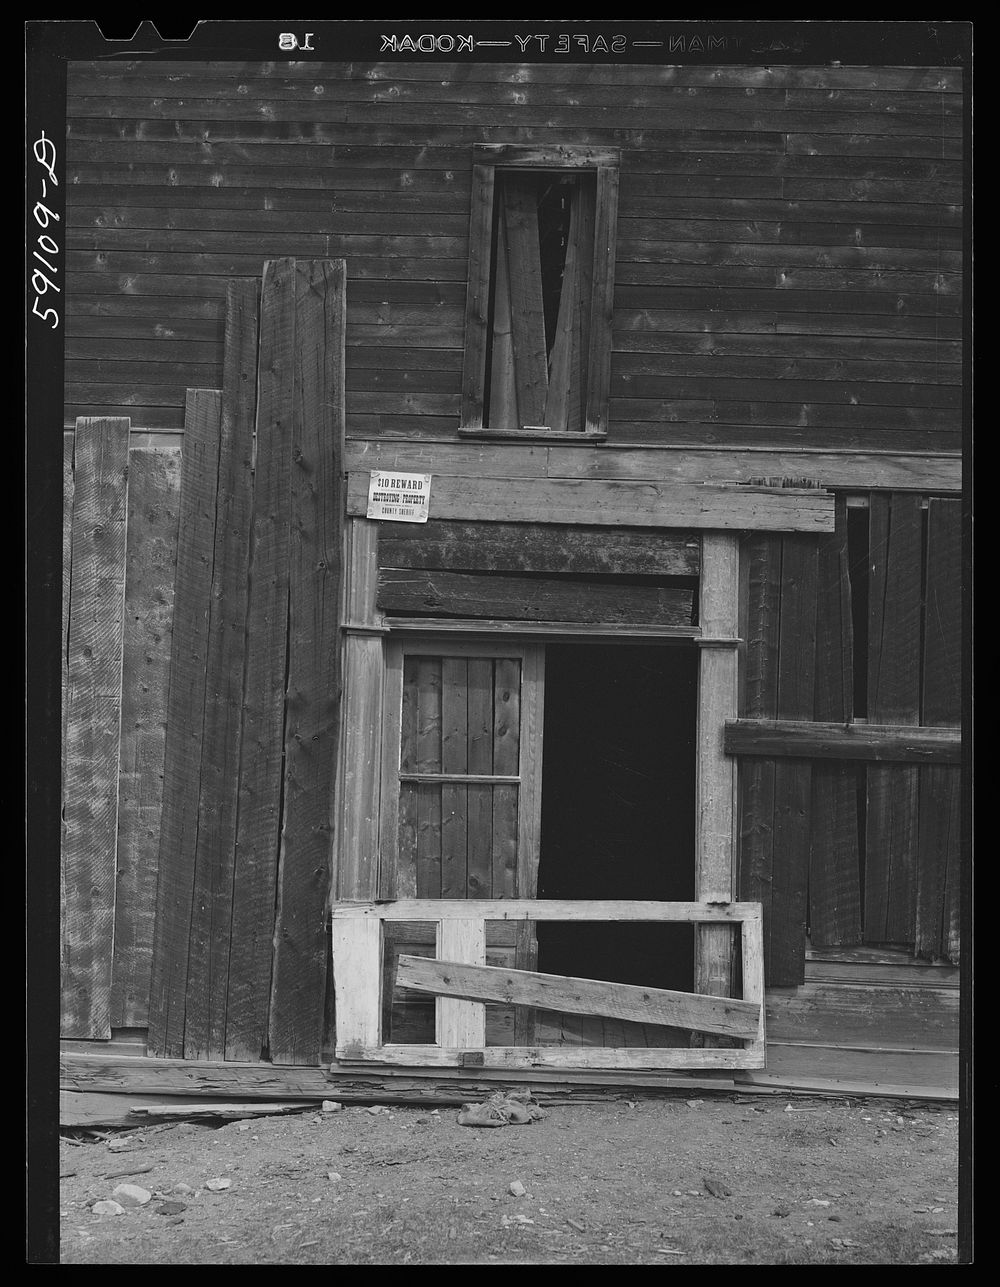 [Untitled photo, possibly related to: Ghost mining town. Ashcroft, Colorado]. Sourced from the Library of Congress.